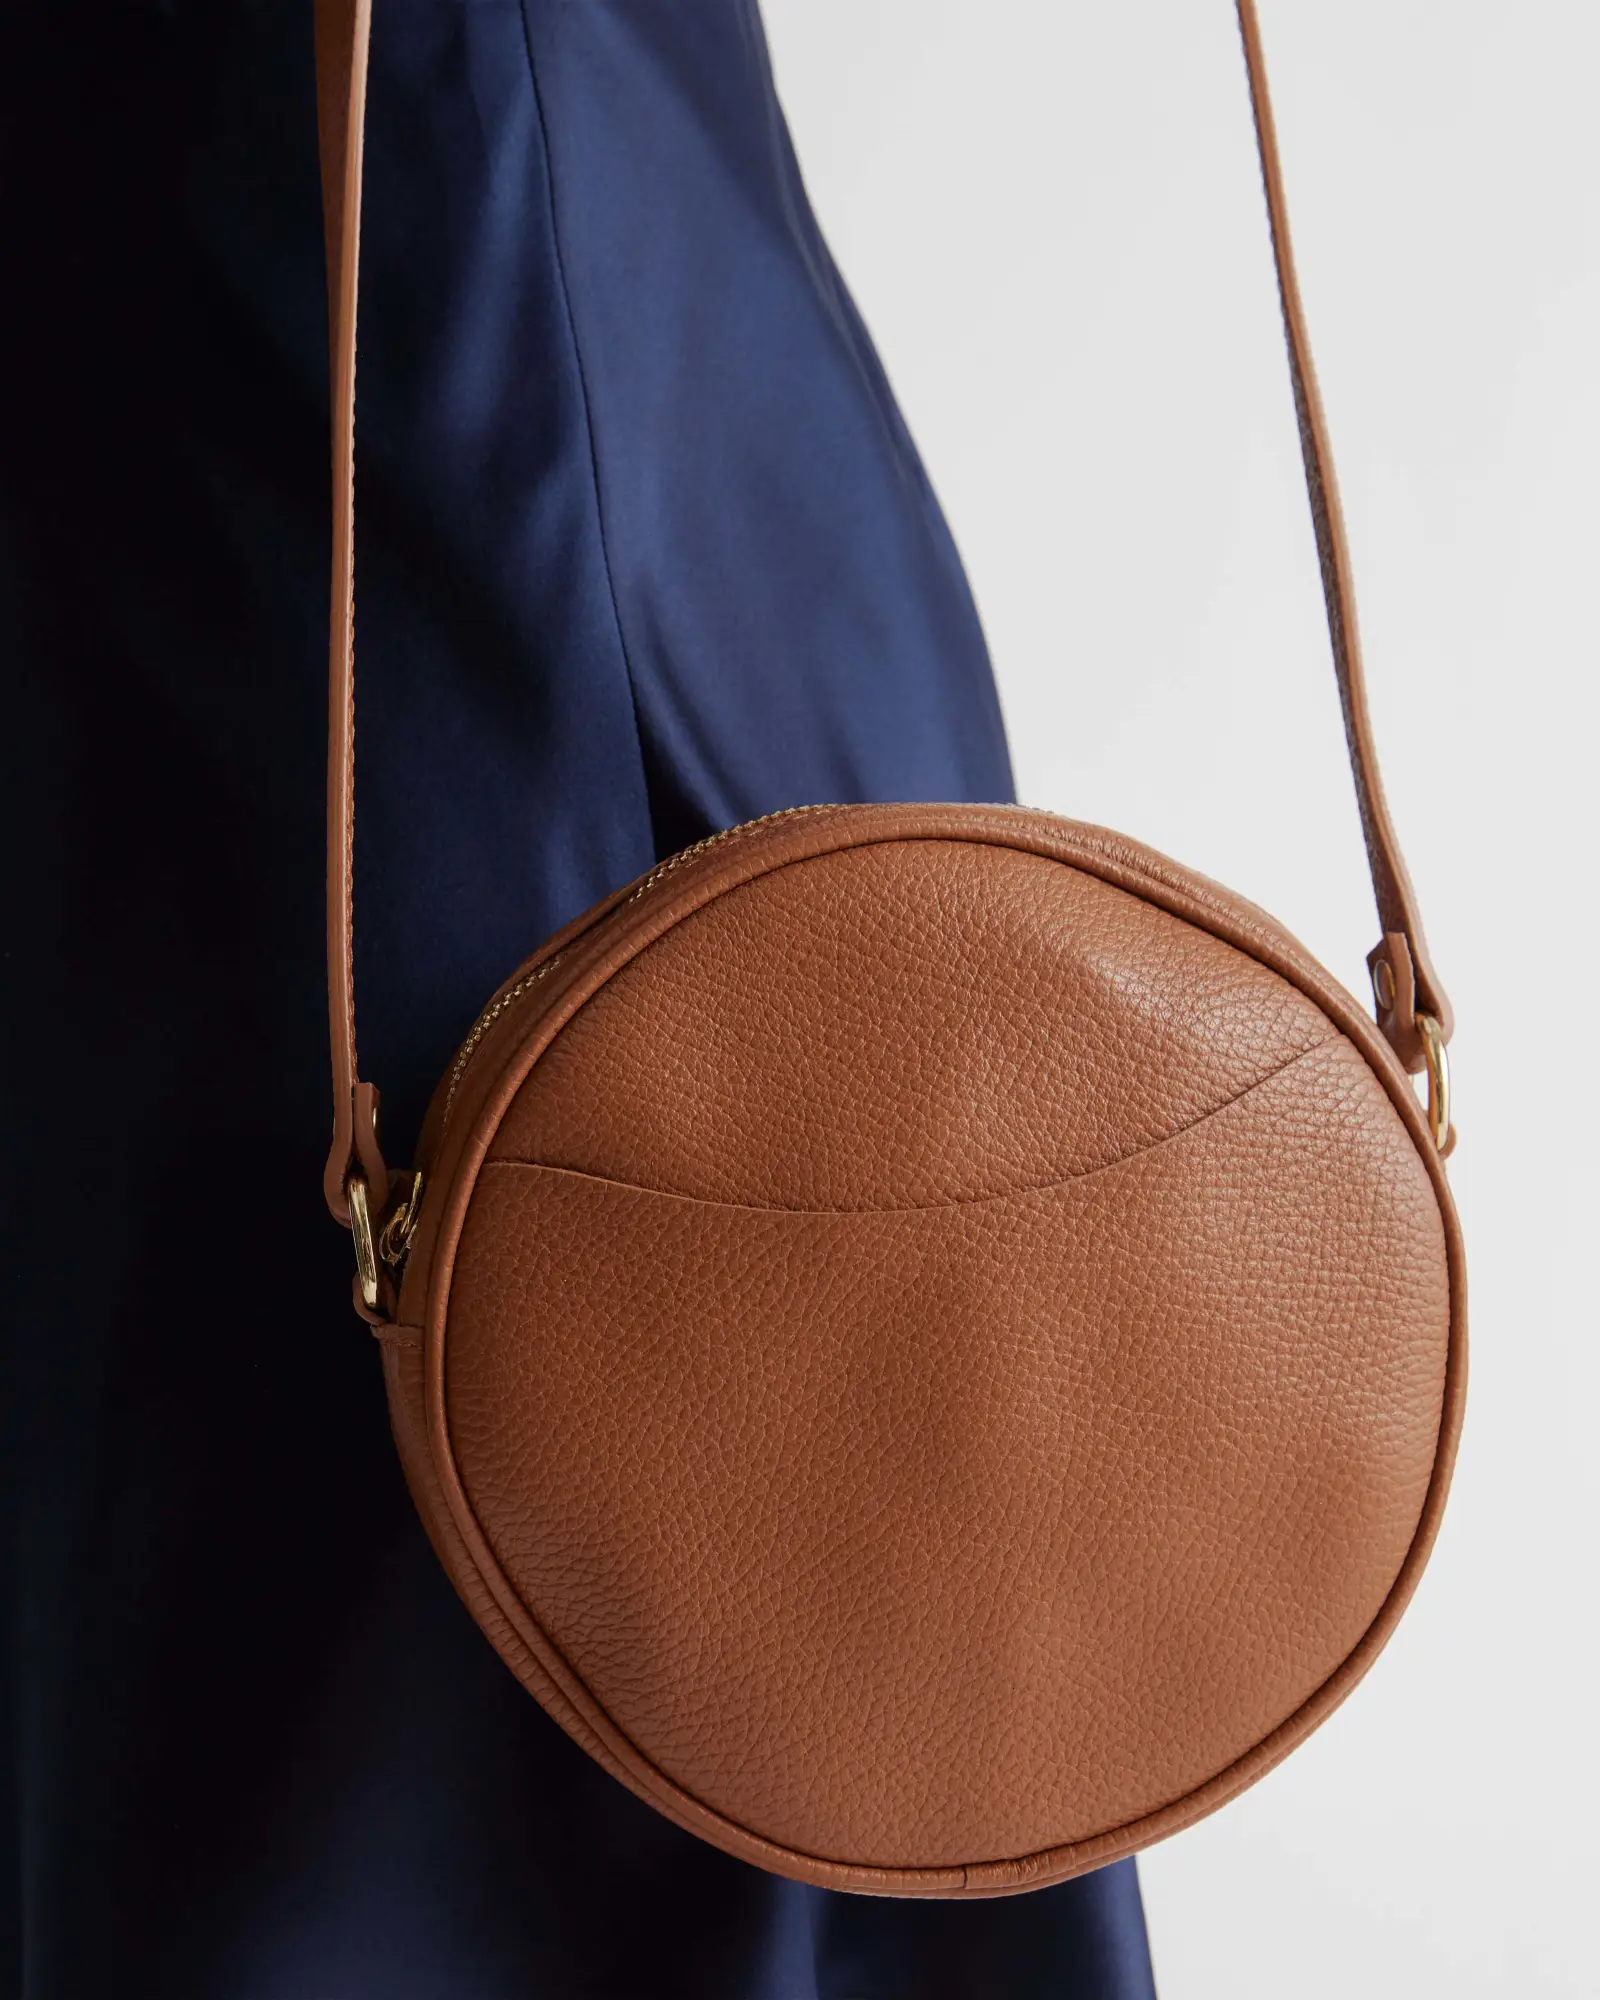 A round brown leather bag. 